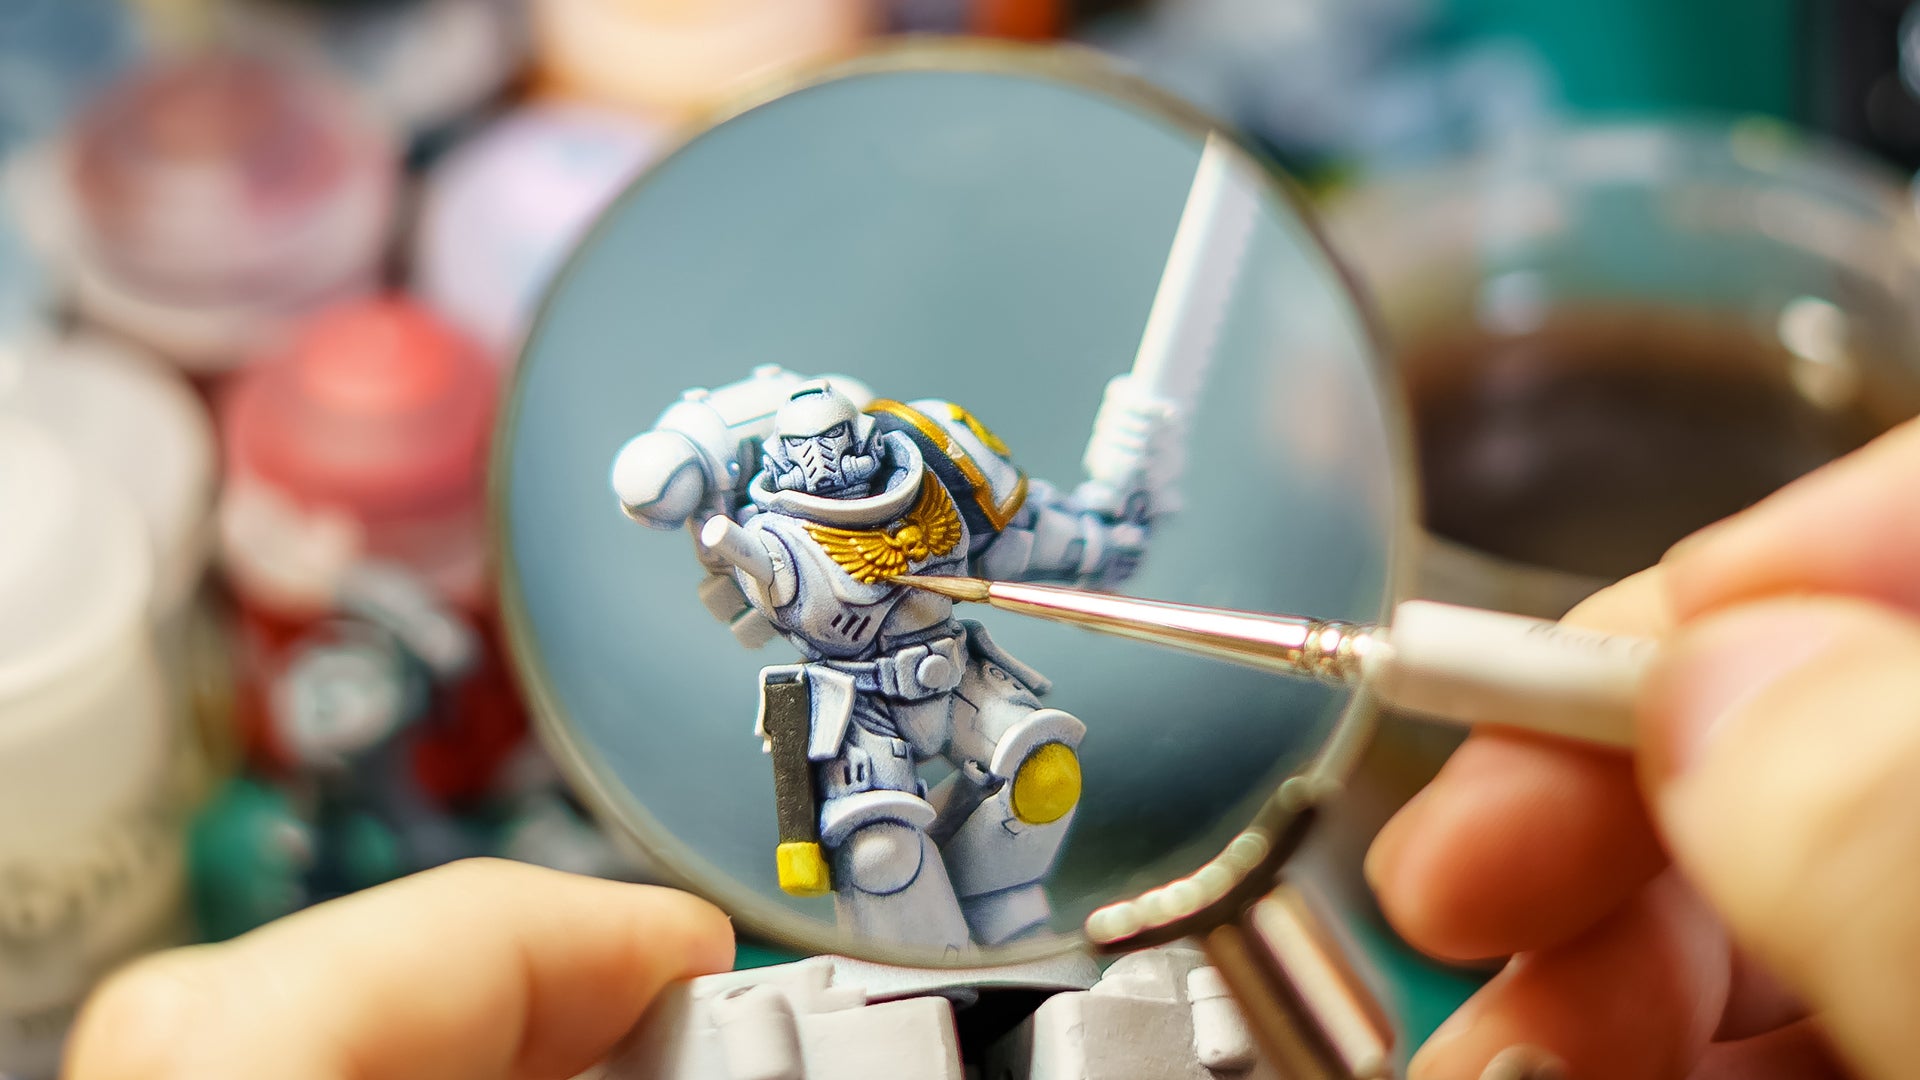 5 best miniatures paints that aren't Citadel - and what to use